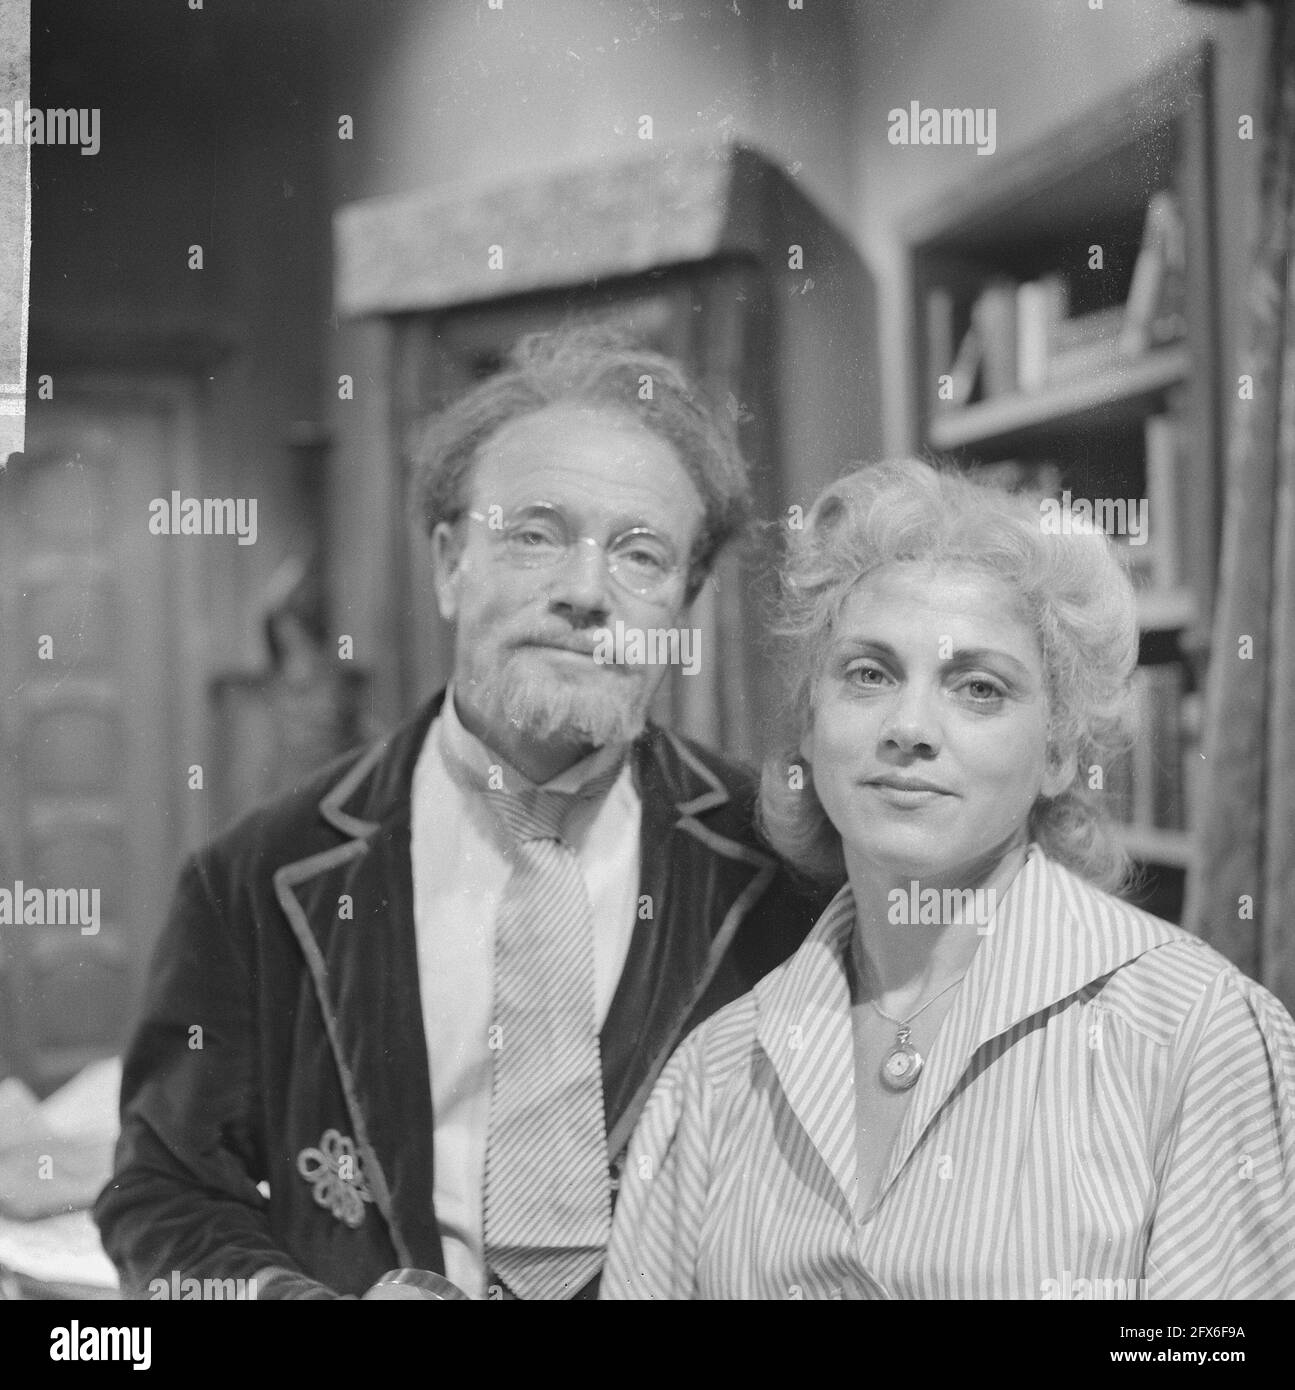 He sits at the melting pot', a TV play by VPRO, Max Croiset as Professor Mensch and Emmy Lopes Dias as Miss Schmidt, October 17, 1962, actors, television dramas, The Netherlands, 20th century press agency photo, news to remember, documentary, historic photography 1945-1990, visual stories, human history of the Twentieth Century, capturing moments in time Stock Photo